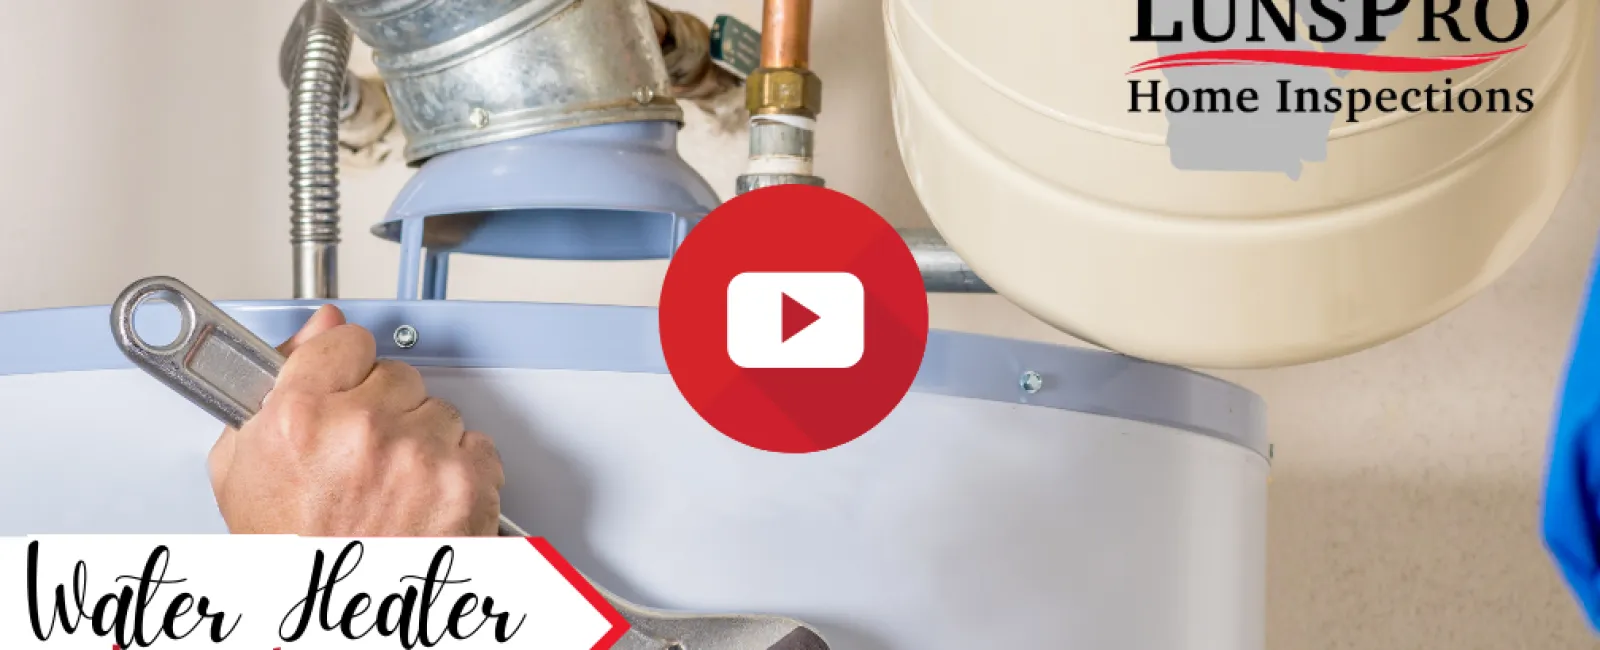 Water Heater Importance stressed by an Ashi-Certified Inspector